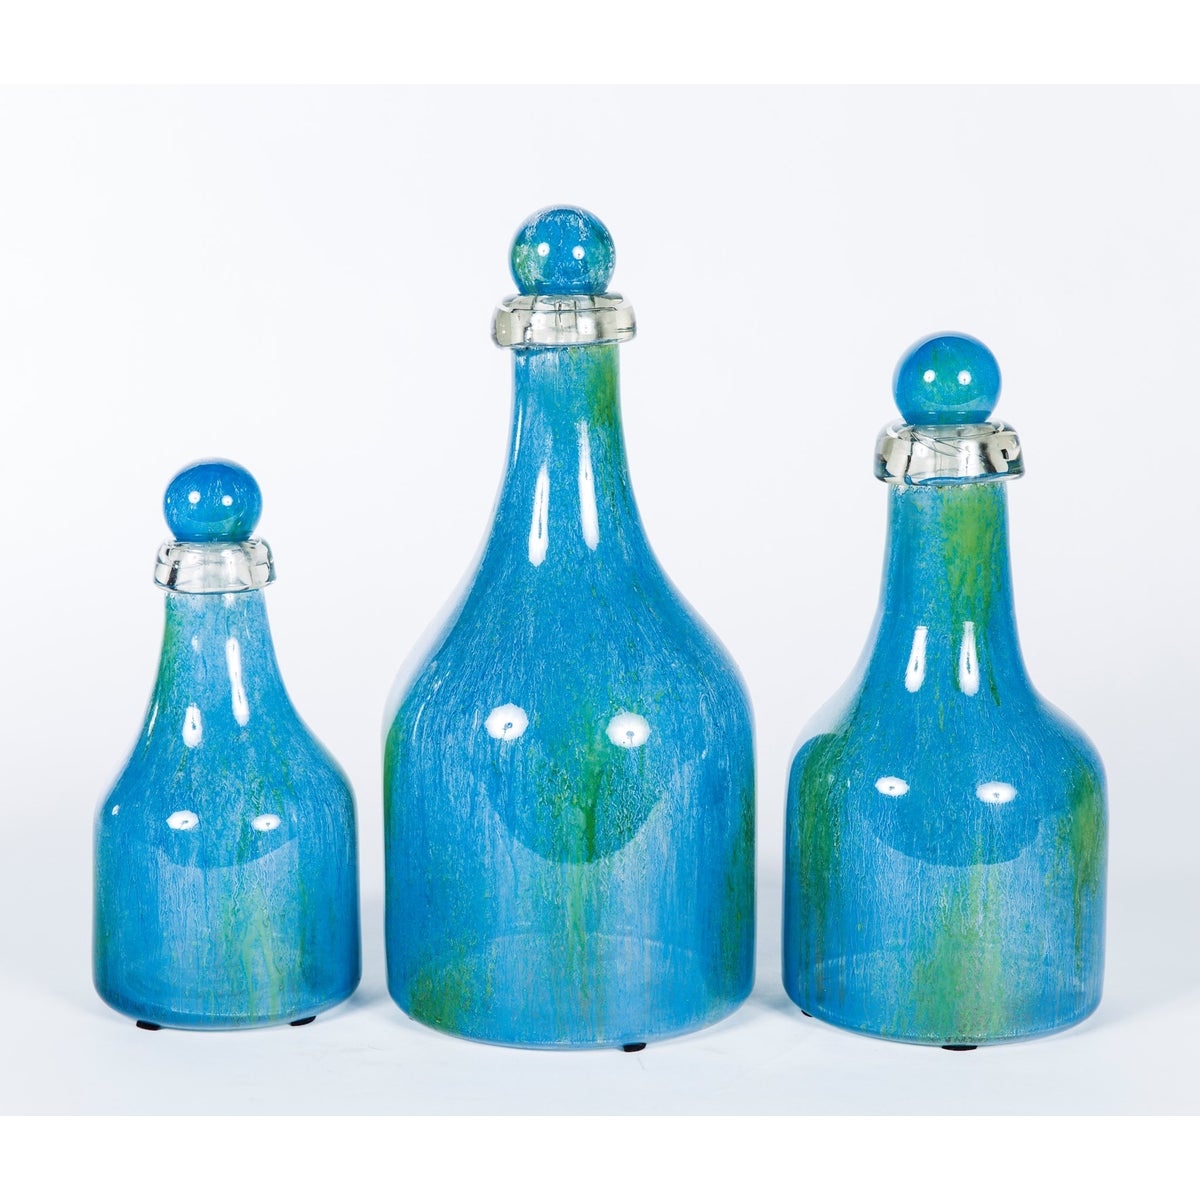 Set of 3 Bottles with Tops in Blue Lagoon Finish